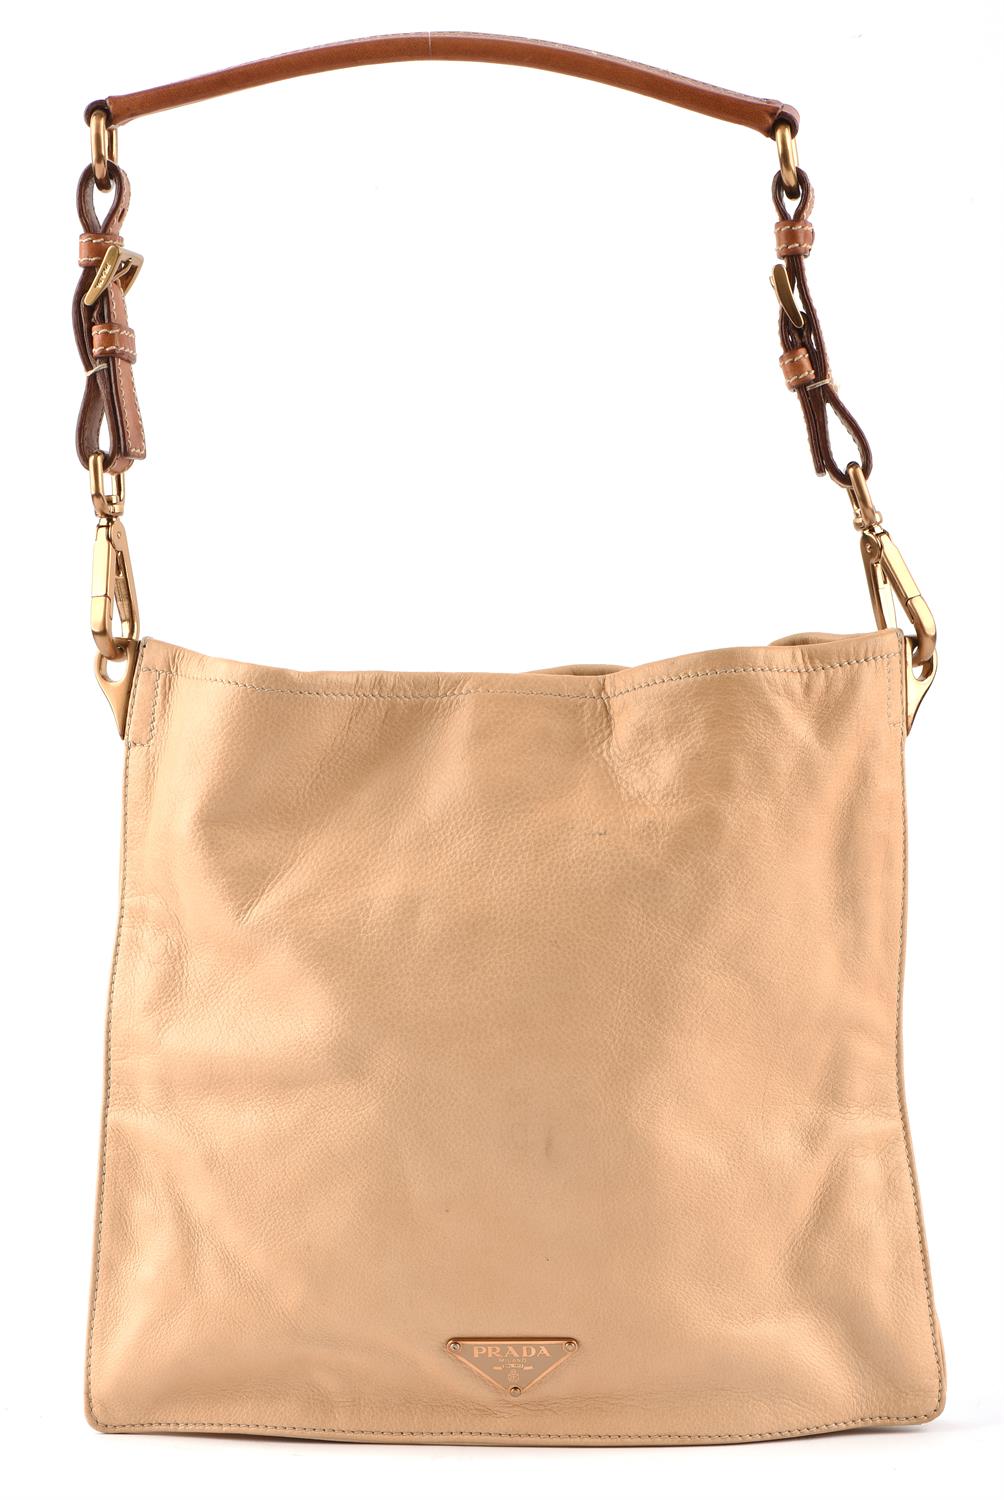 PRADA 1990s light tan square leather bag with baby blue leather lining. With gold coloured hardware - Image 4 of 4